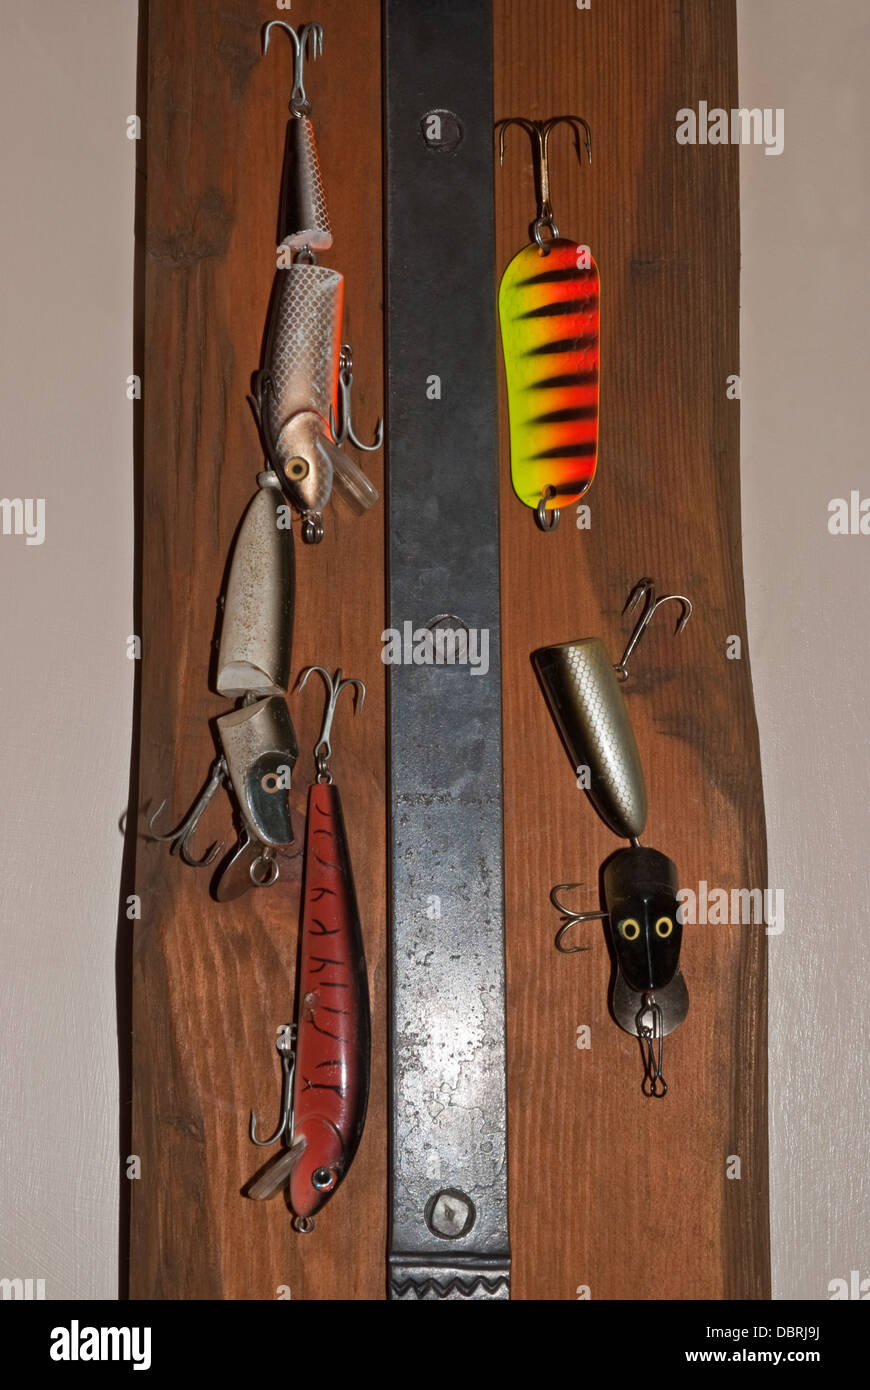 https://c8.alamy.com/comp/DBRJ9J/selection-of-lures-used-for-pike-esox-lucius-fishing-DBRJ9J.jpg